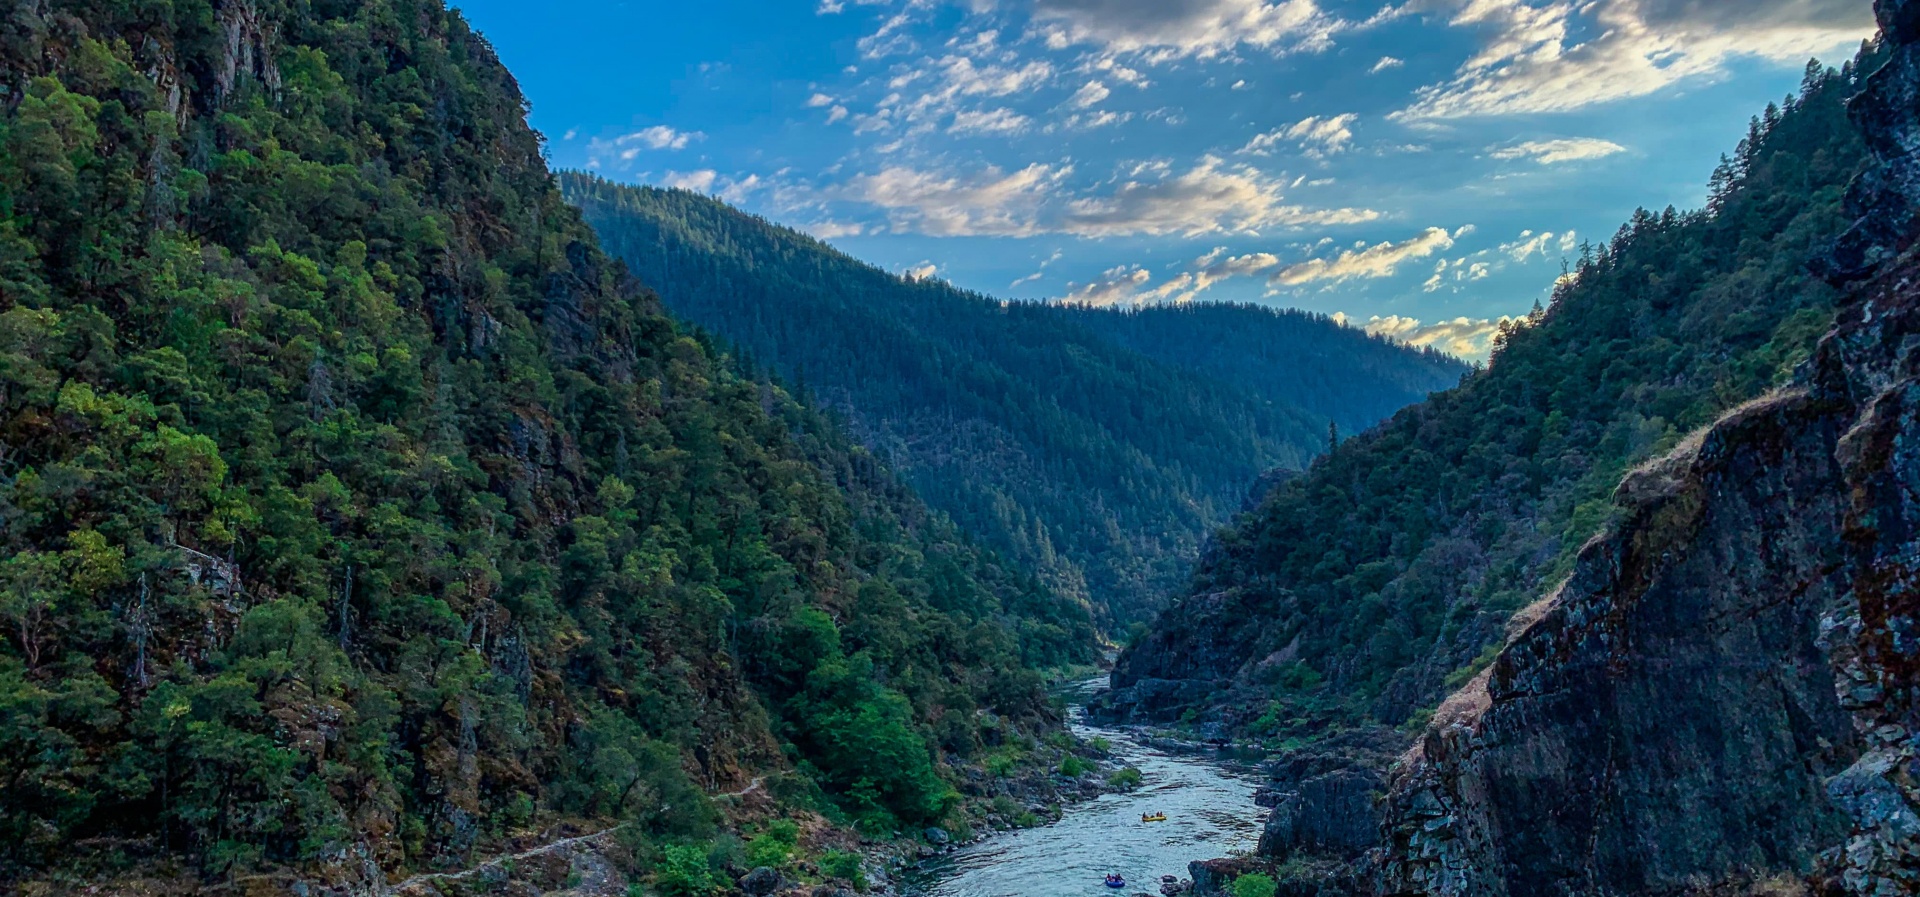 Rogue River-Siskiyou National Forest - Rogue River (Wild & Scenic